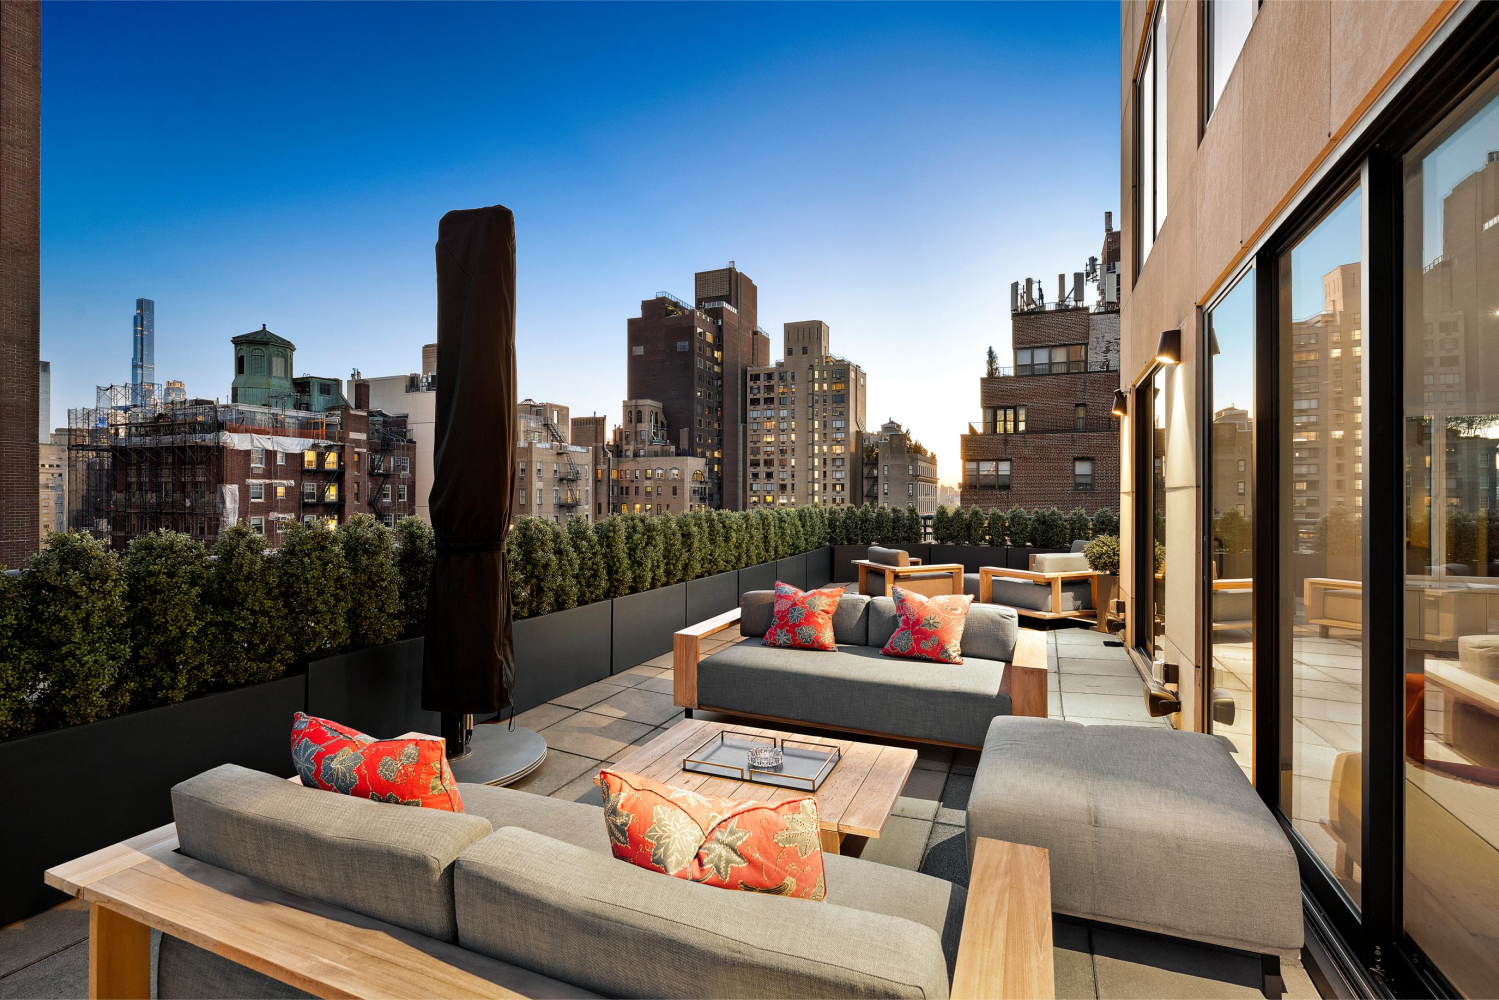 45 East 80th Street 15A, Upper East Side, Upper East Side, NYC - 4 Bedrooms  
4.5 Bathrooms  
8 Rooms - 